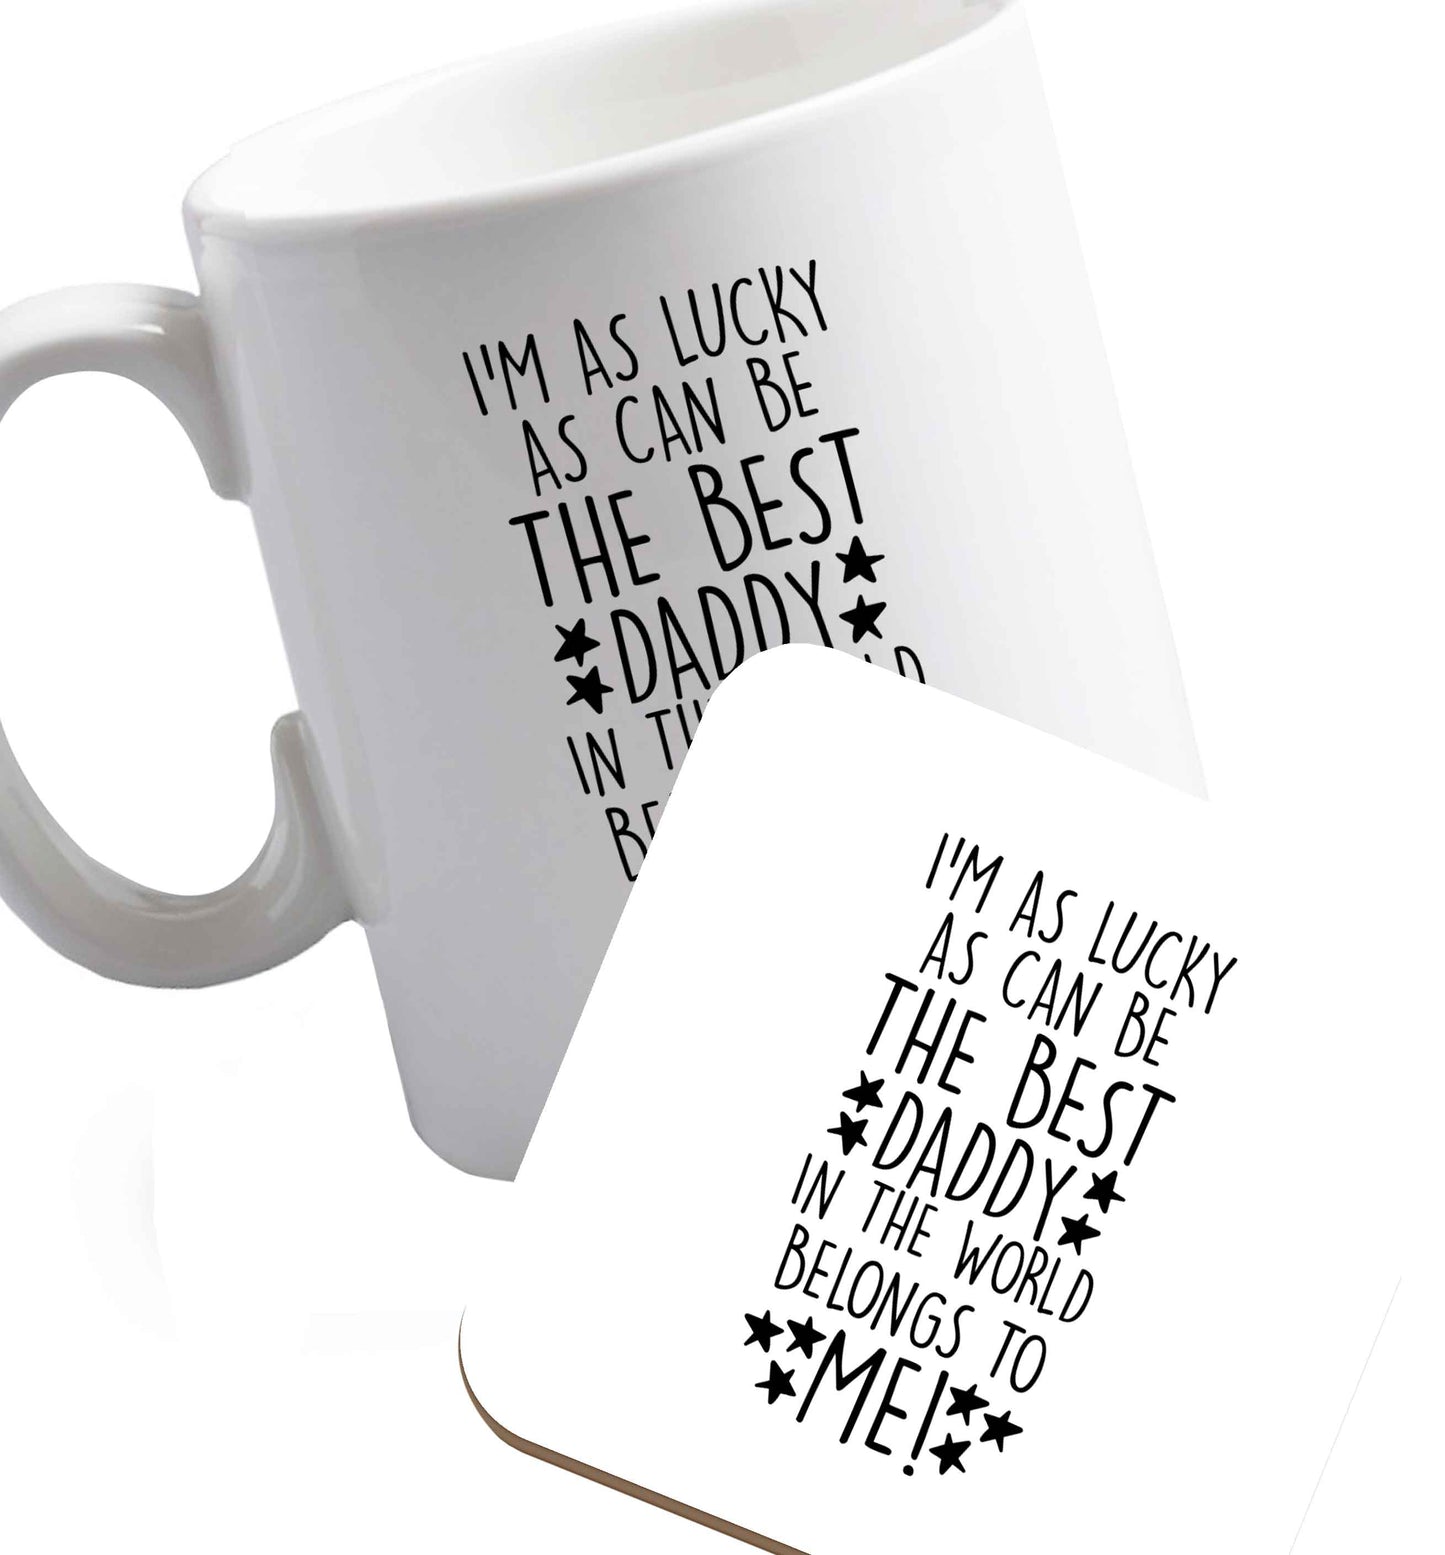 10 oz I'm as lucky as can be the worlds greatest dad belongs to me! ceramic mug and coaster set right handed